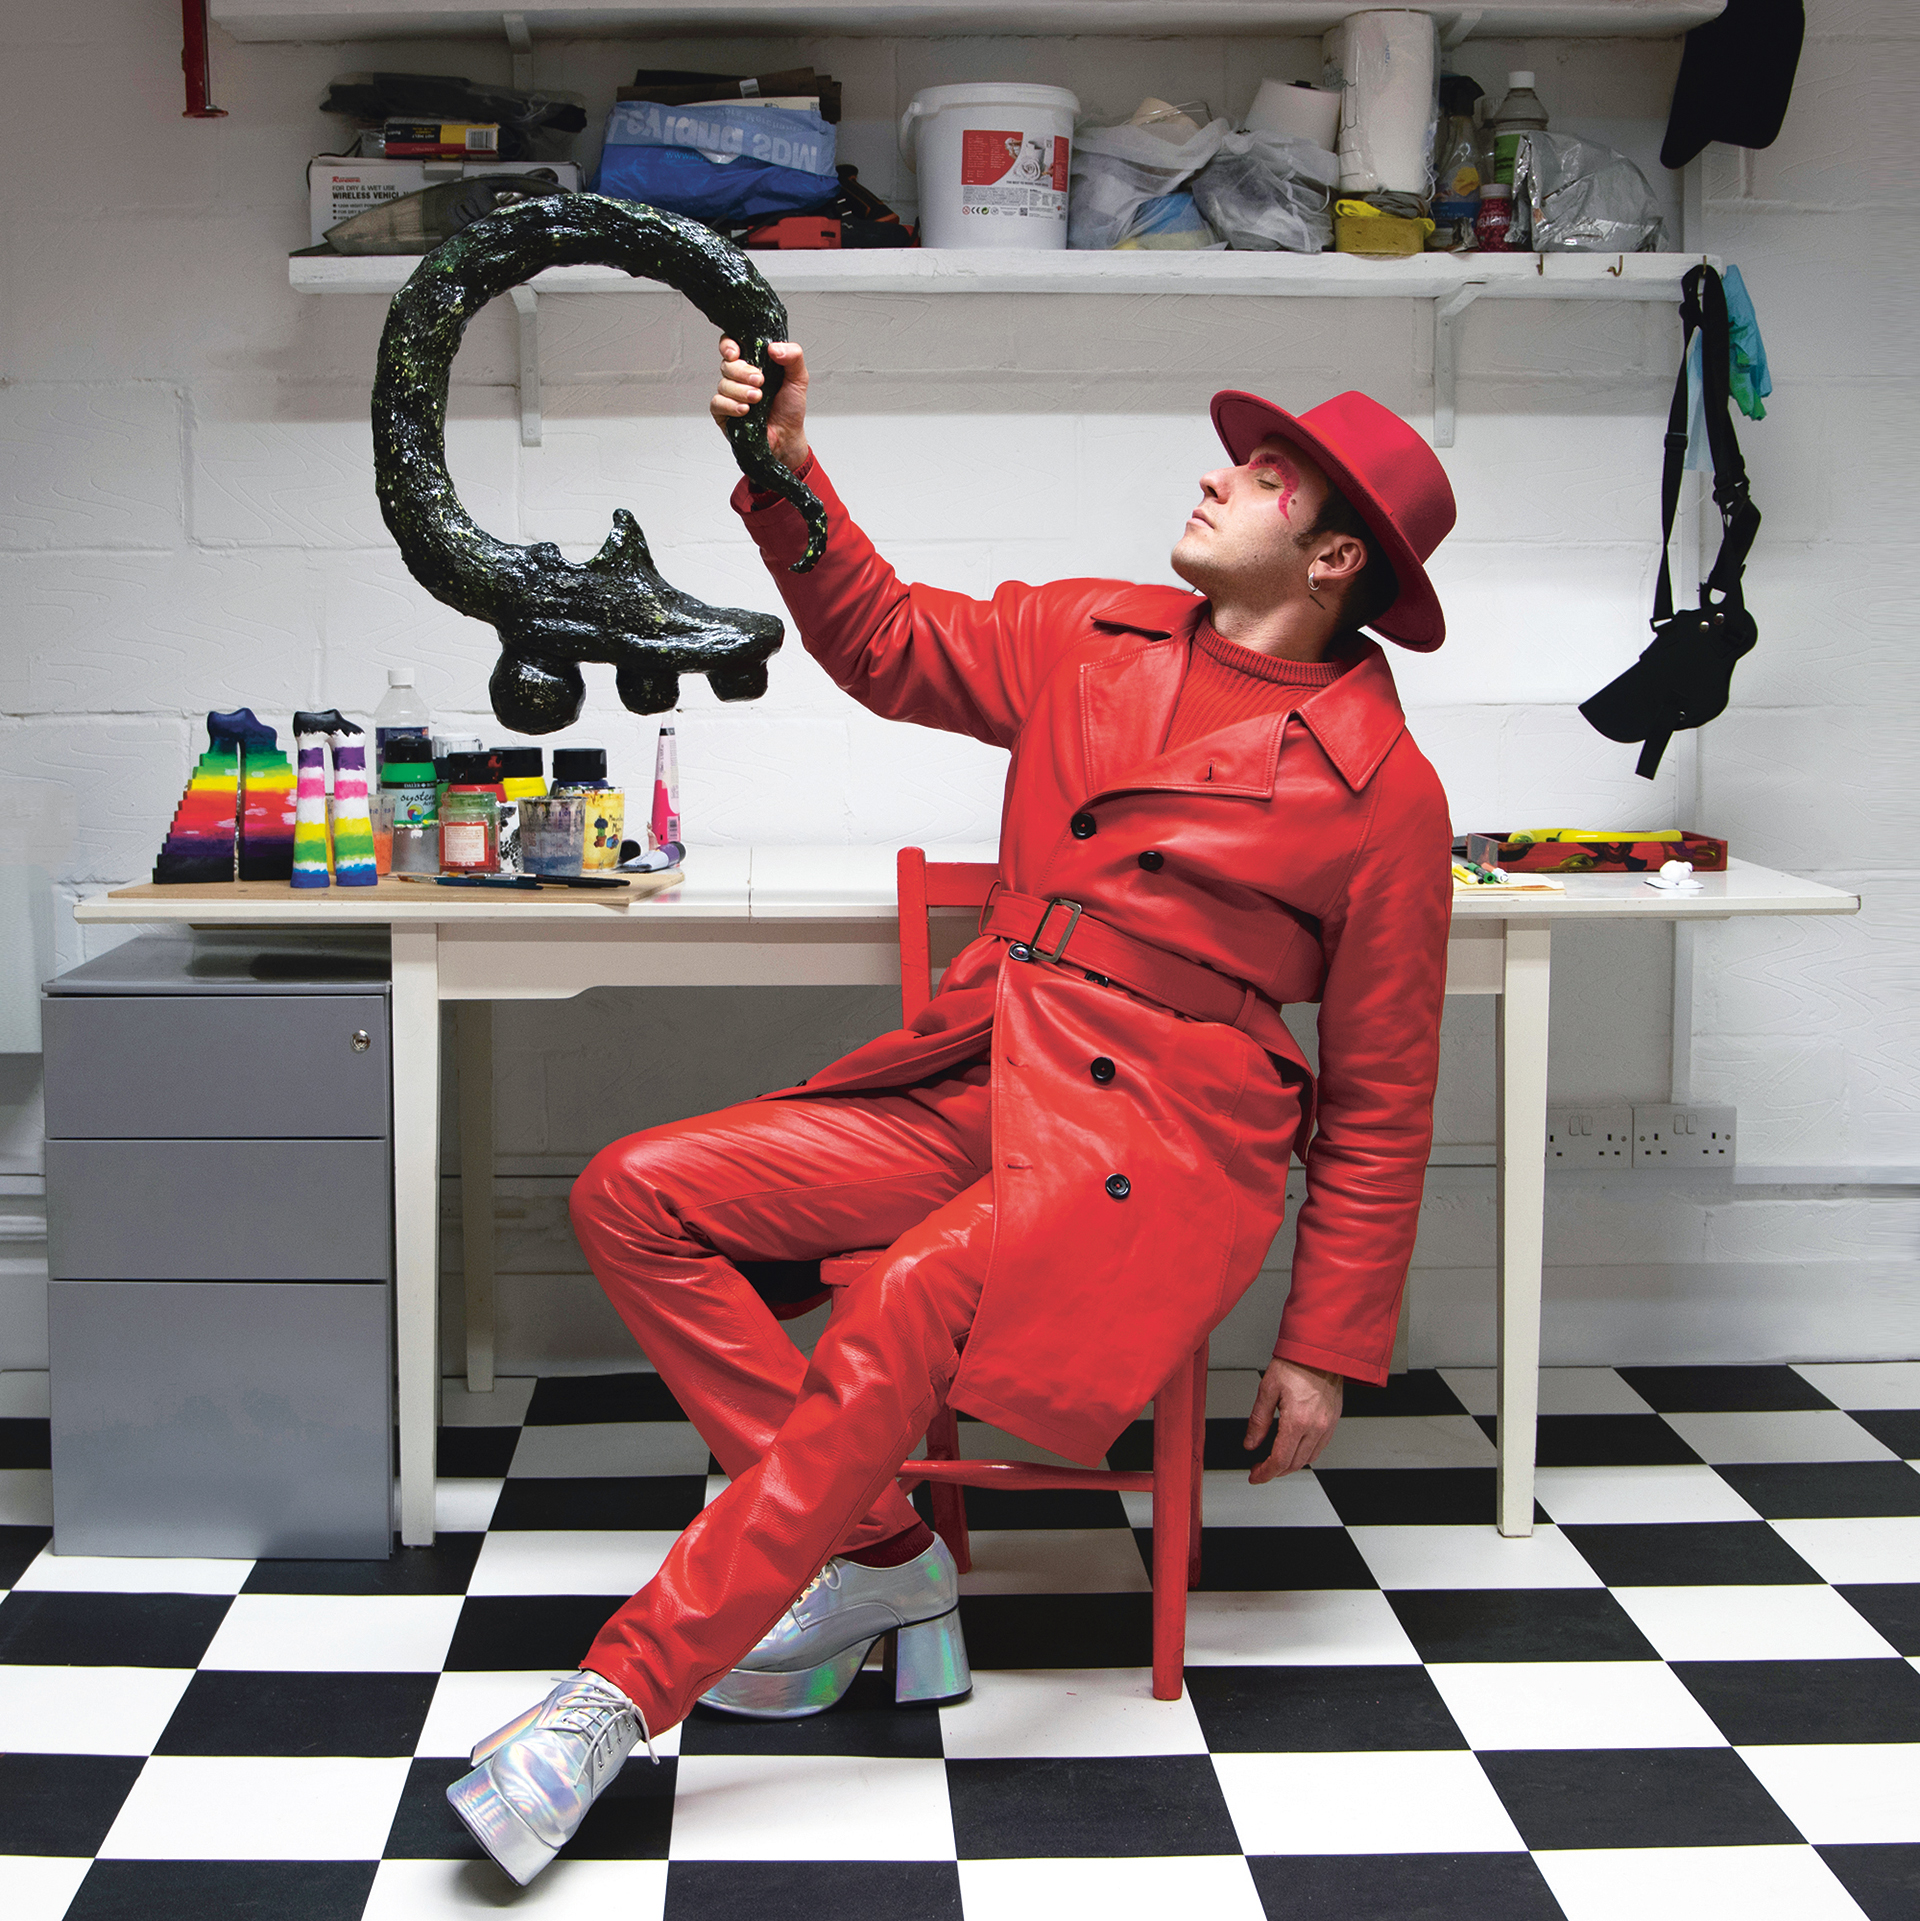 A man dressed in red hat, coat and trousers poses on a chair on a black and white floor. Image: Rose Leahy